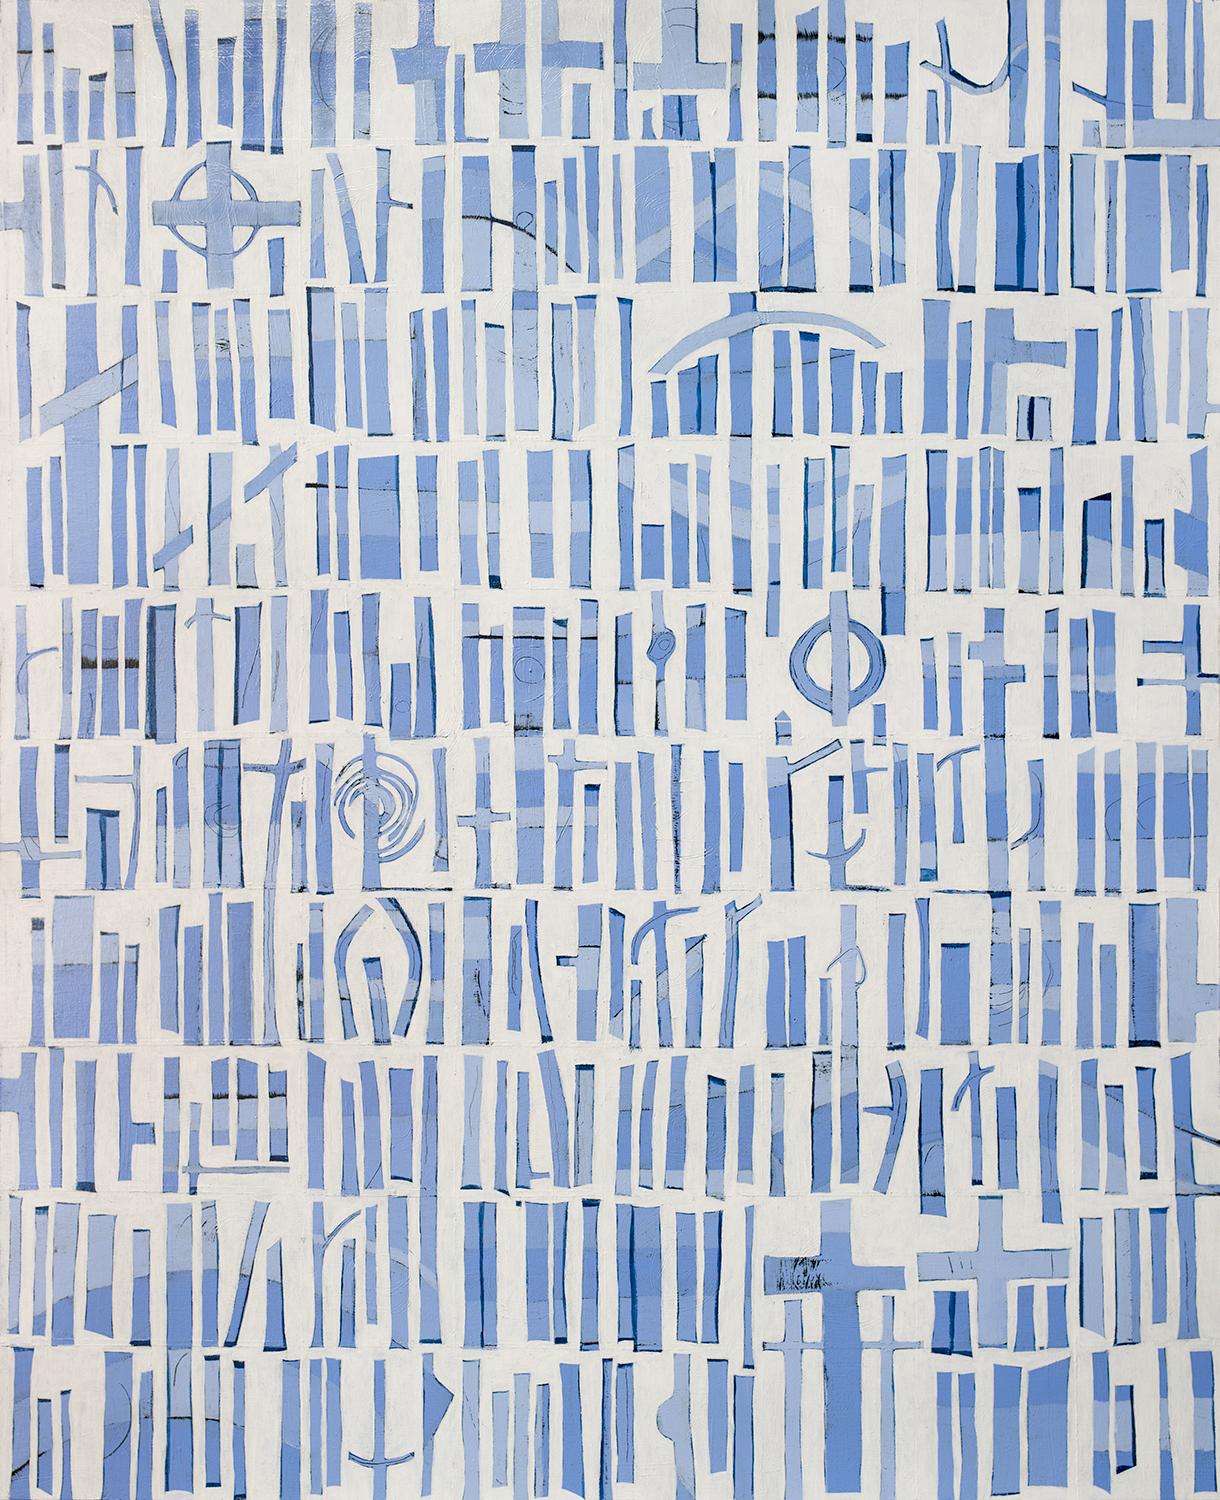 Sofie Swann Abstract Print - "A Summer Day in Nantucket" Limited Edition Giclee Print, 45" x 36"